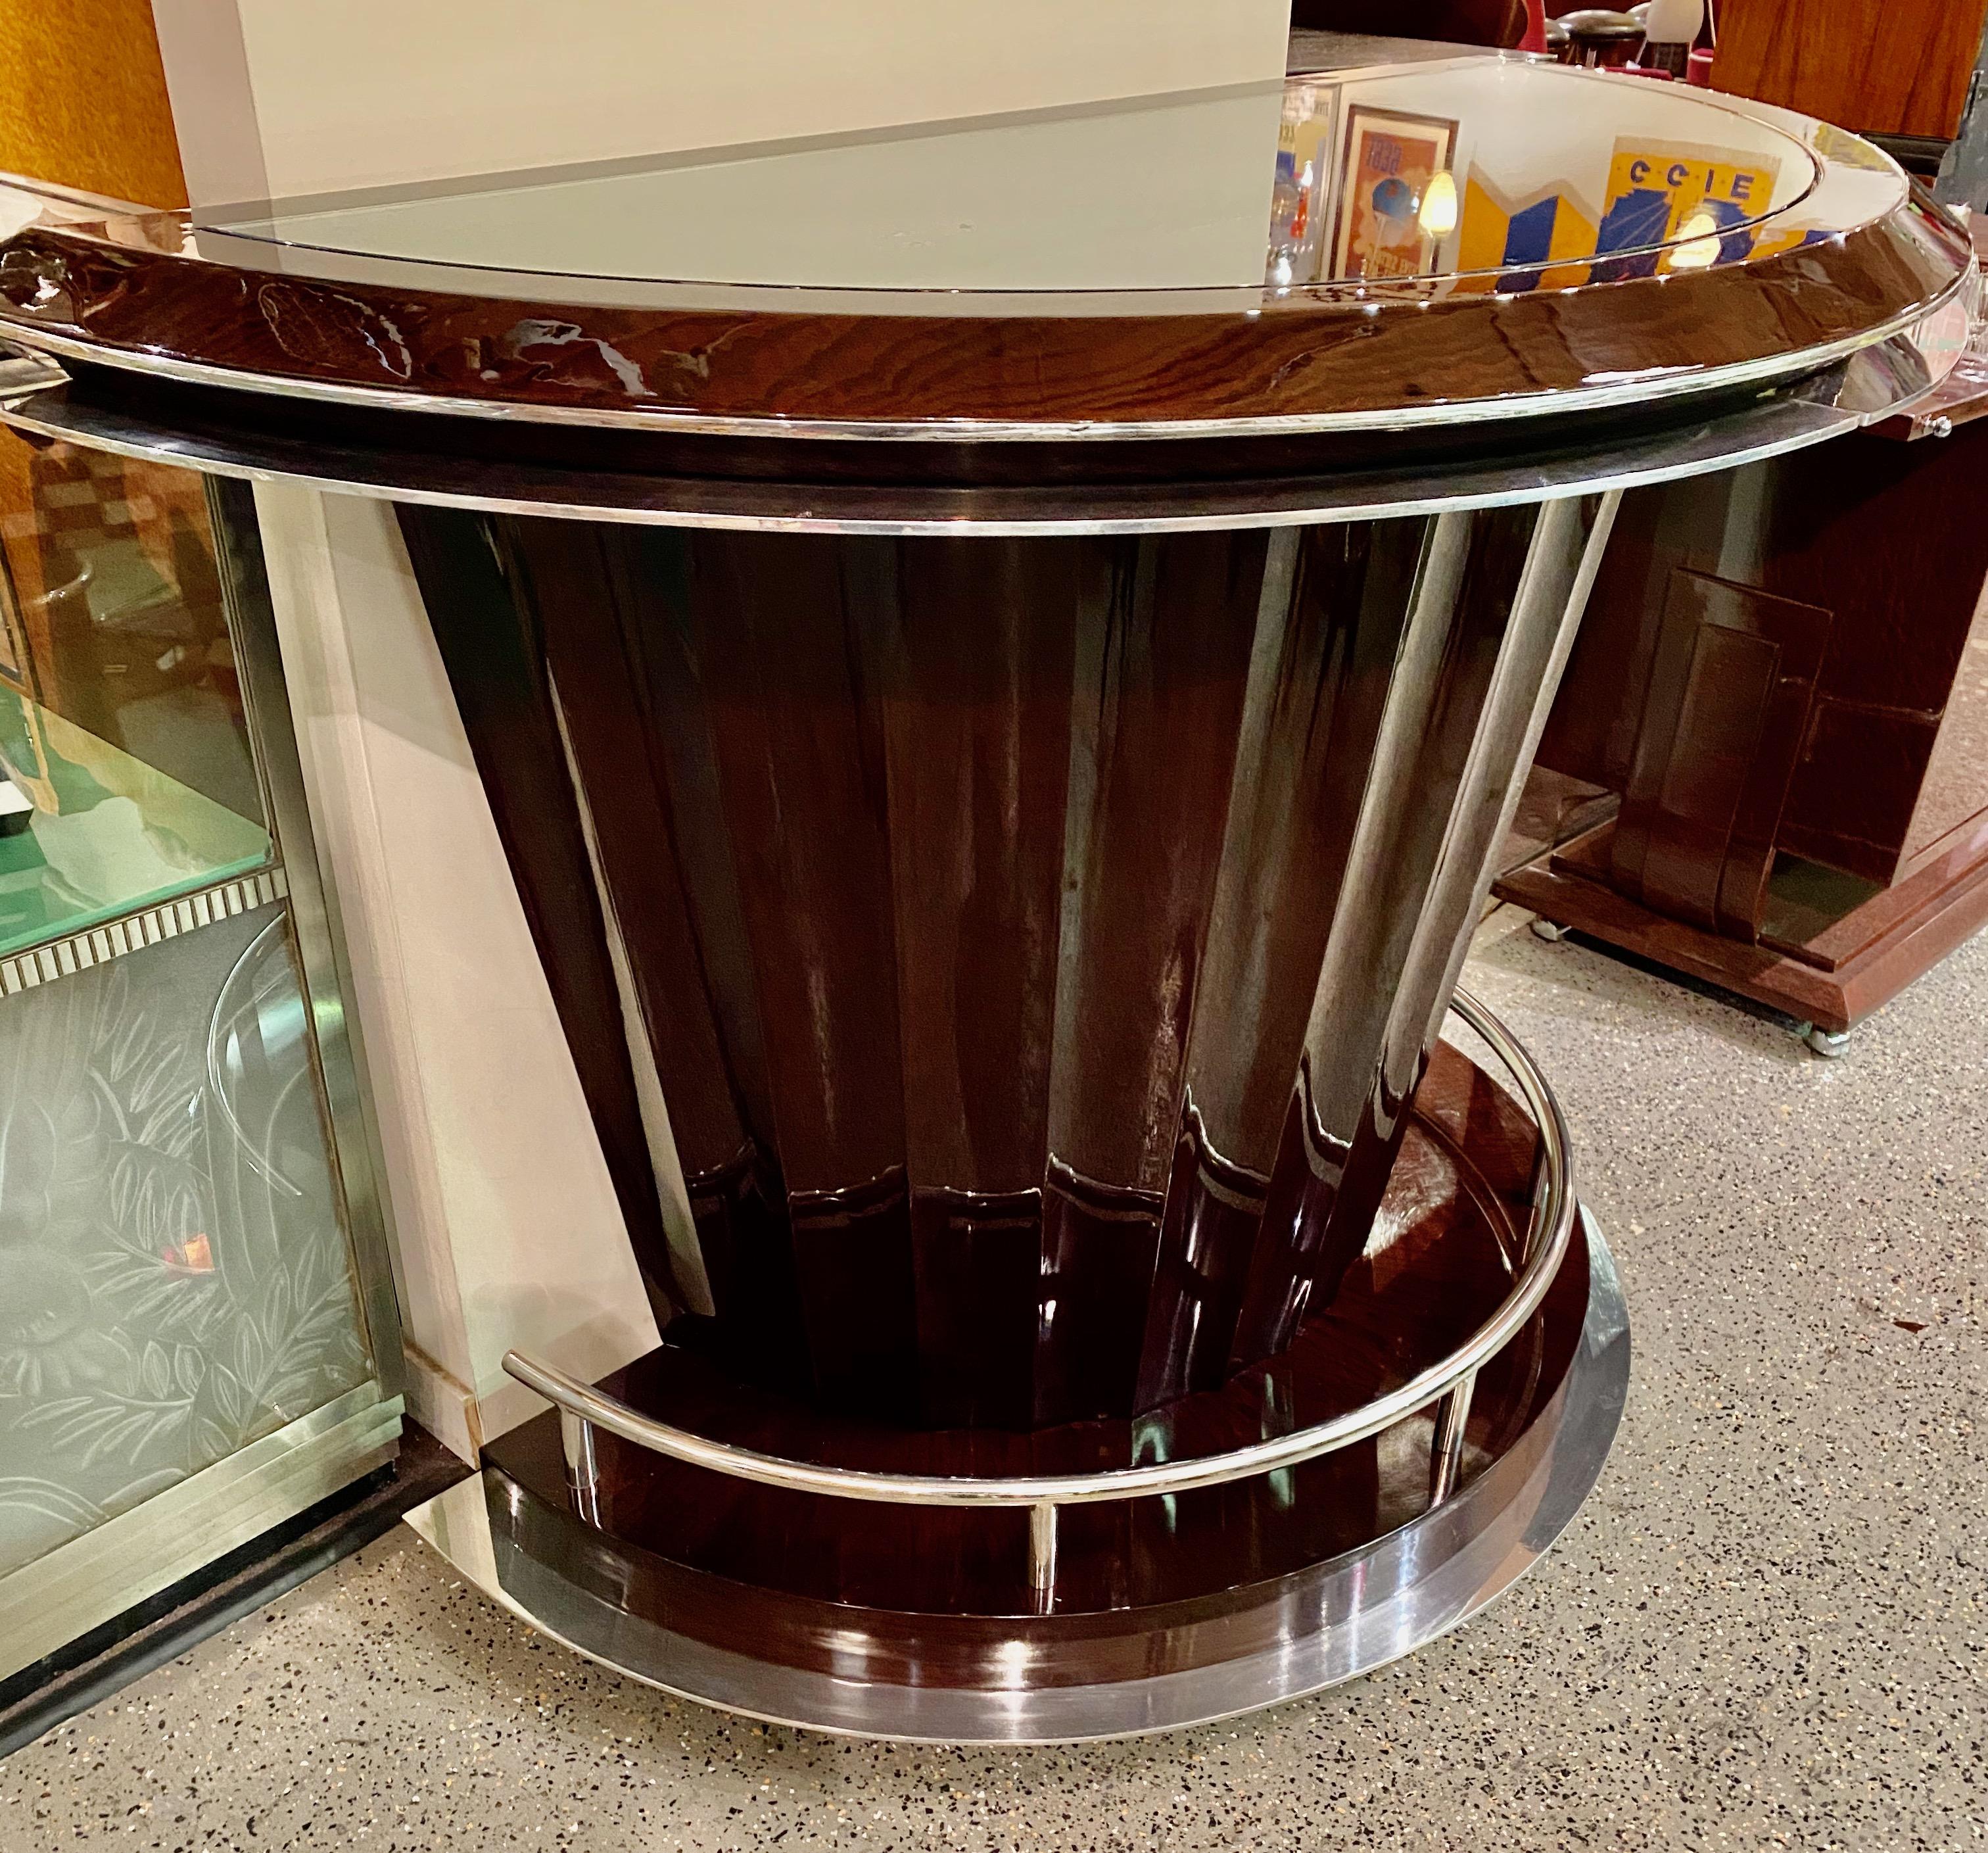 Art Deco custom fluted stand behind bar with chrome. Dark walnut wood, hand-finished with a stunning European patina. This newly made custom design would be great for your home bar, man cave or annex for your dining room experience.

Many nice